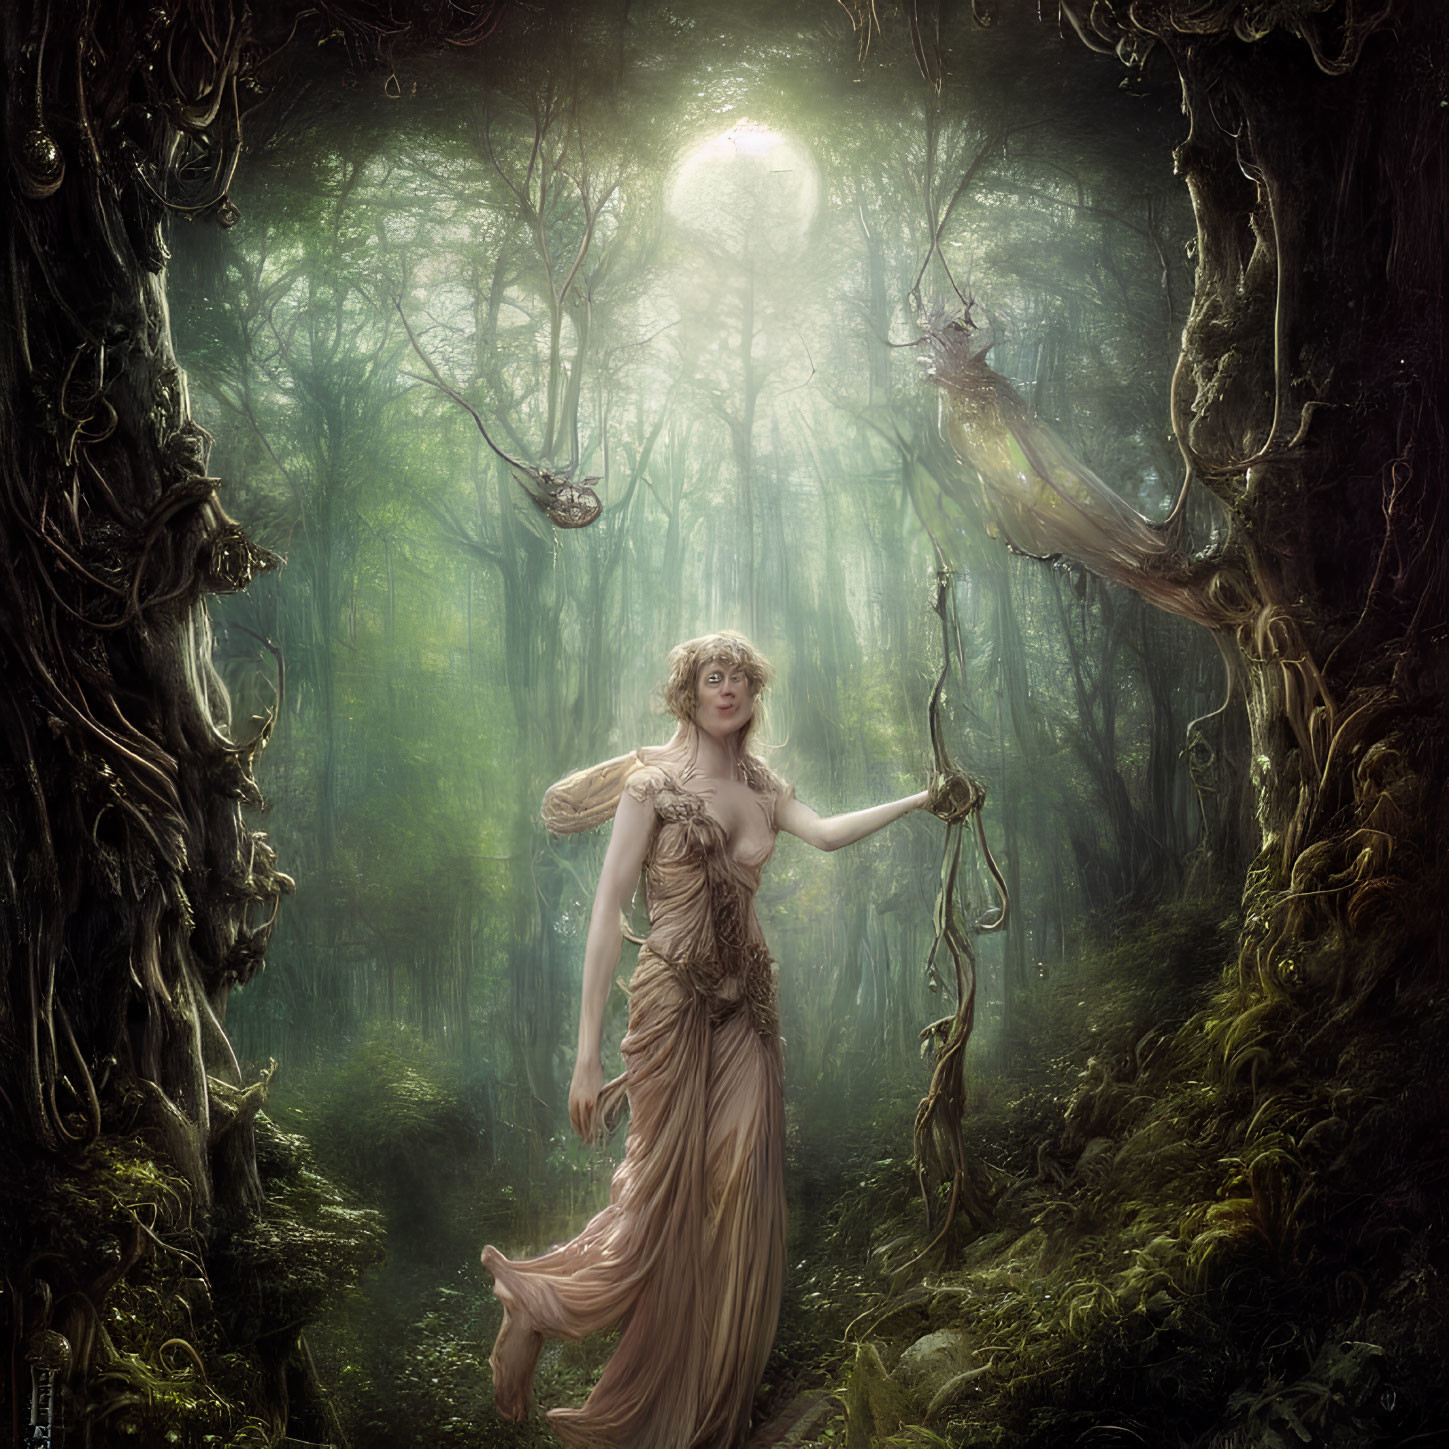 Woman in flowing dress in enchanted forest with glowing orb and owl